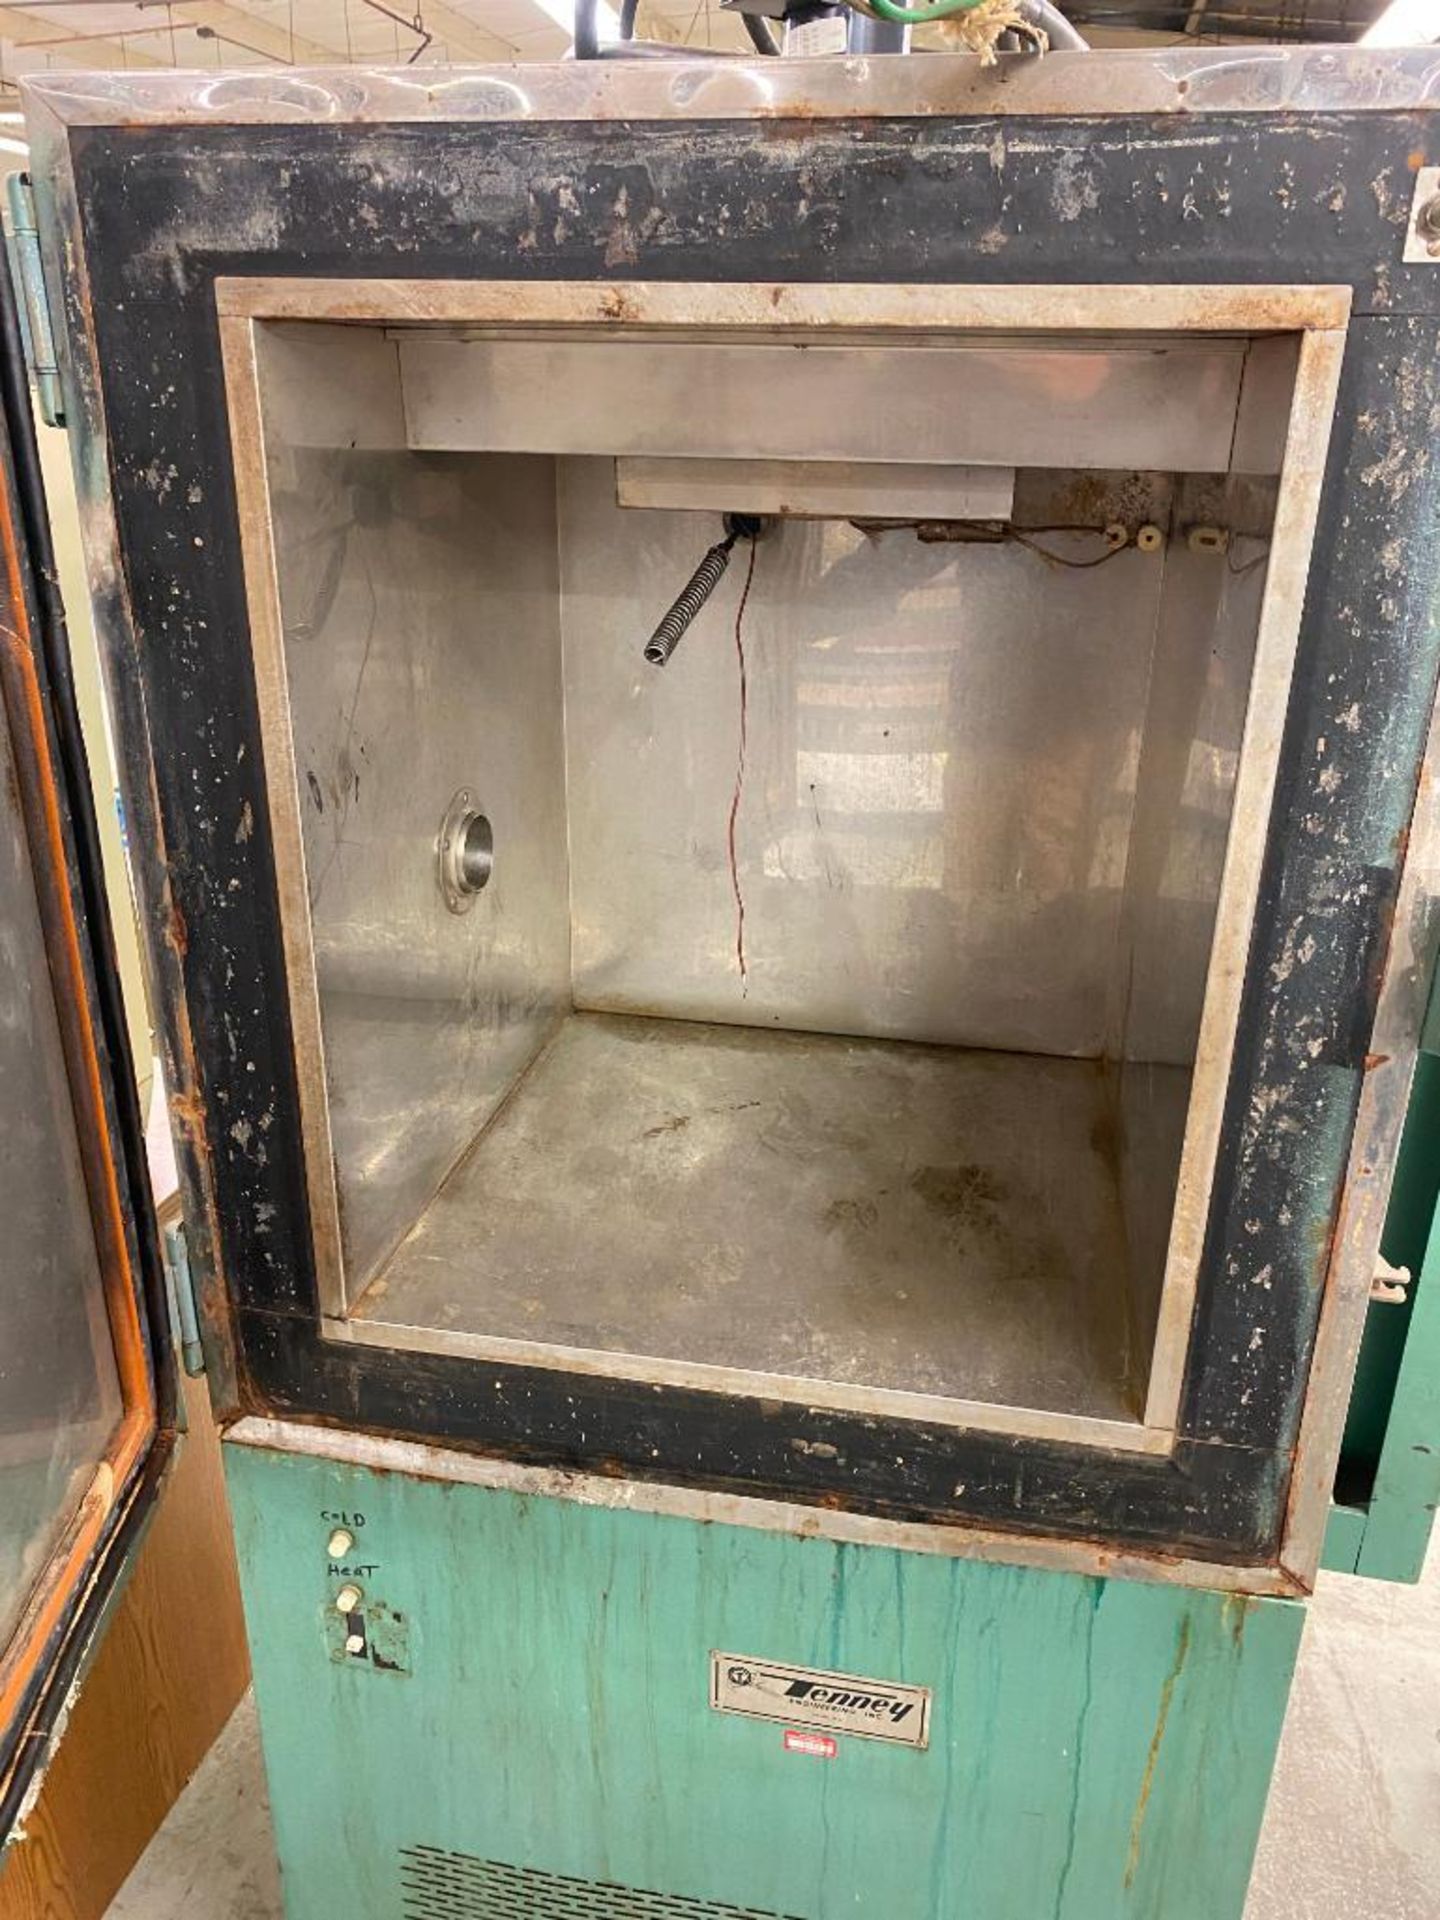 Tenney Environmental Test Chamber, Model T-5-110350, S/N 7140, Cooler & Oven - Image 2 of 5